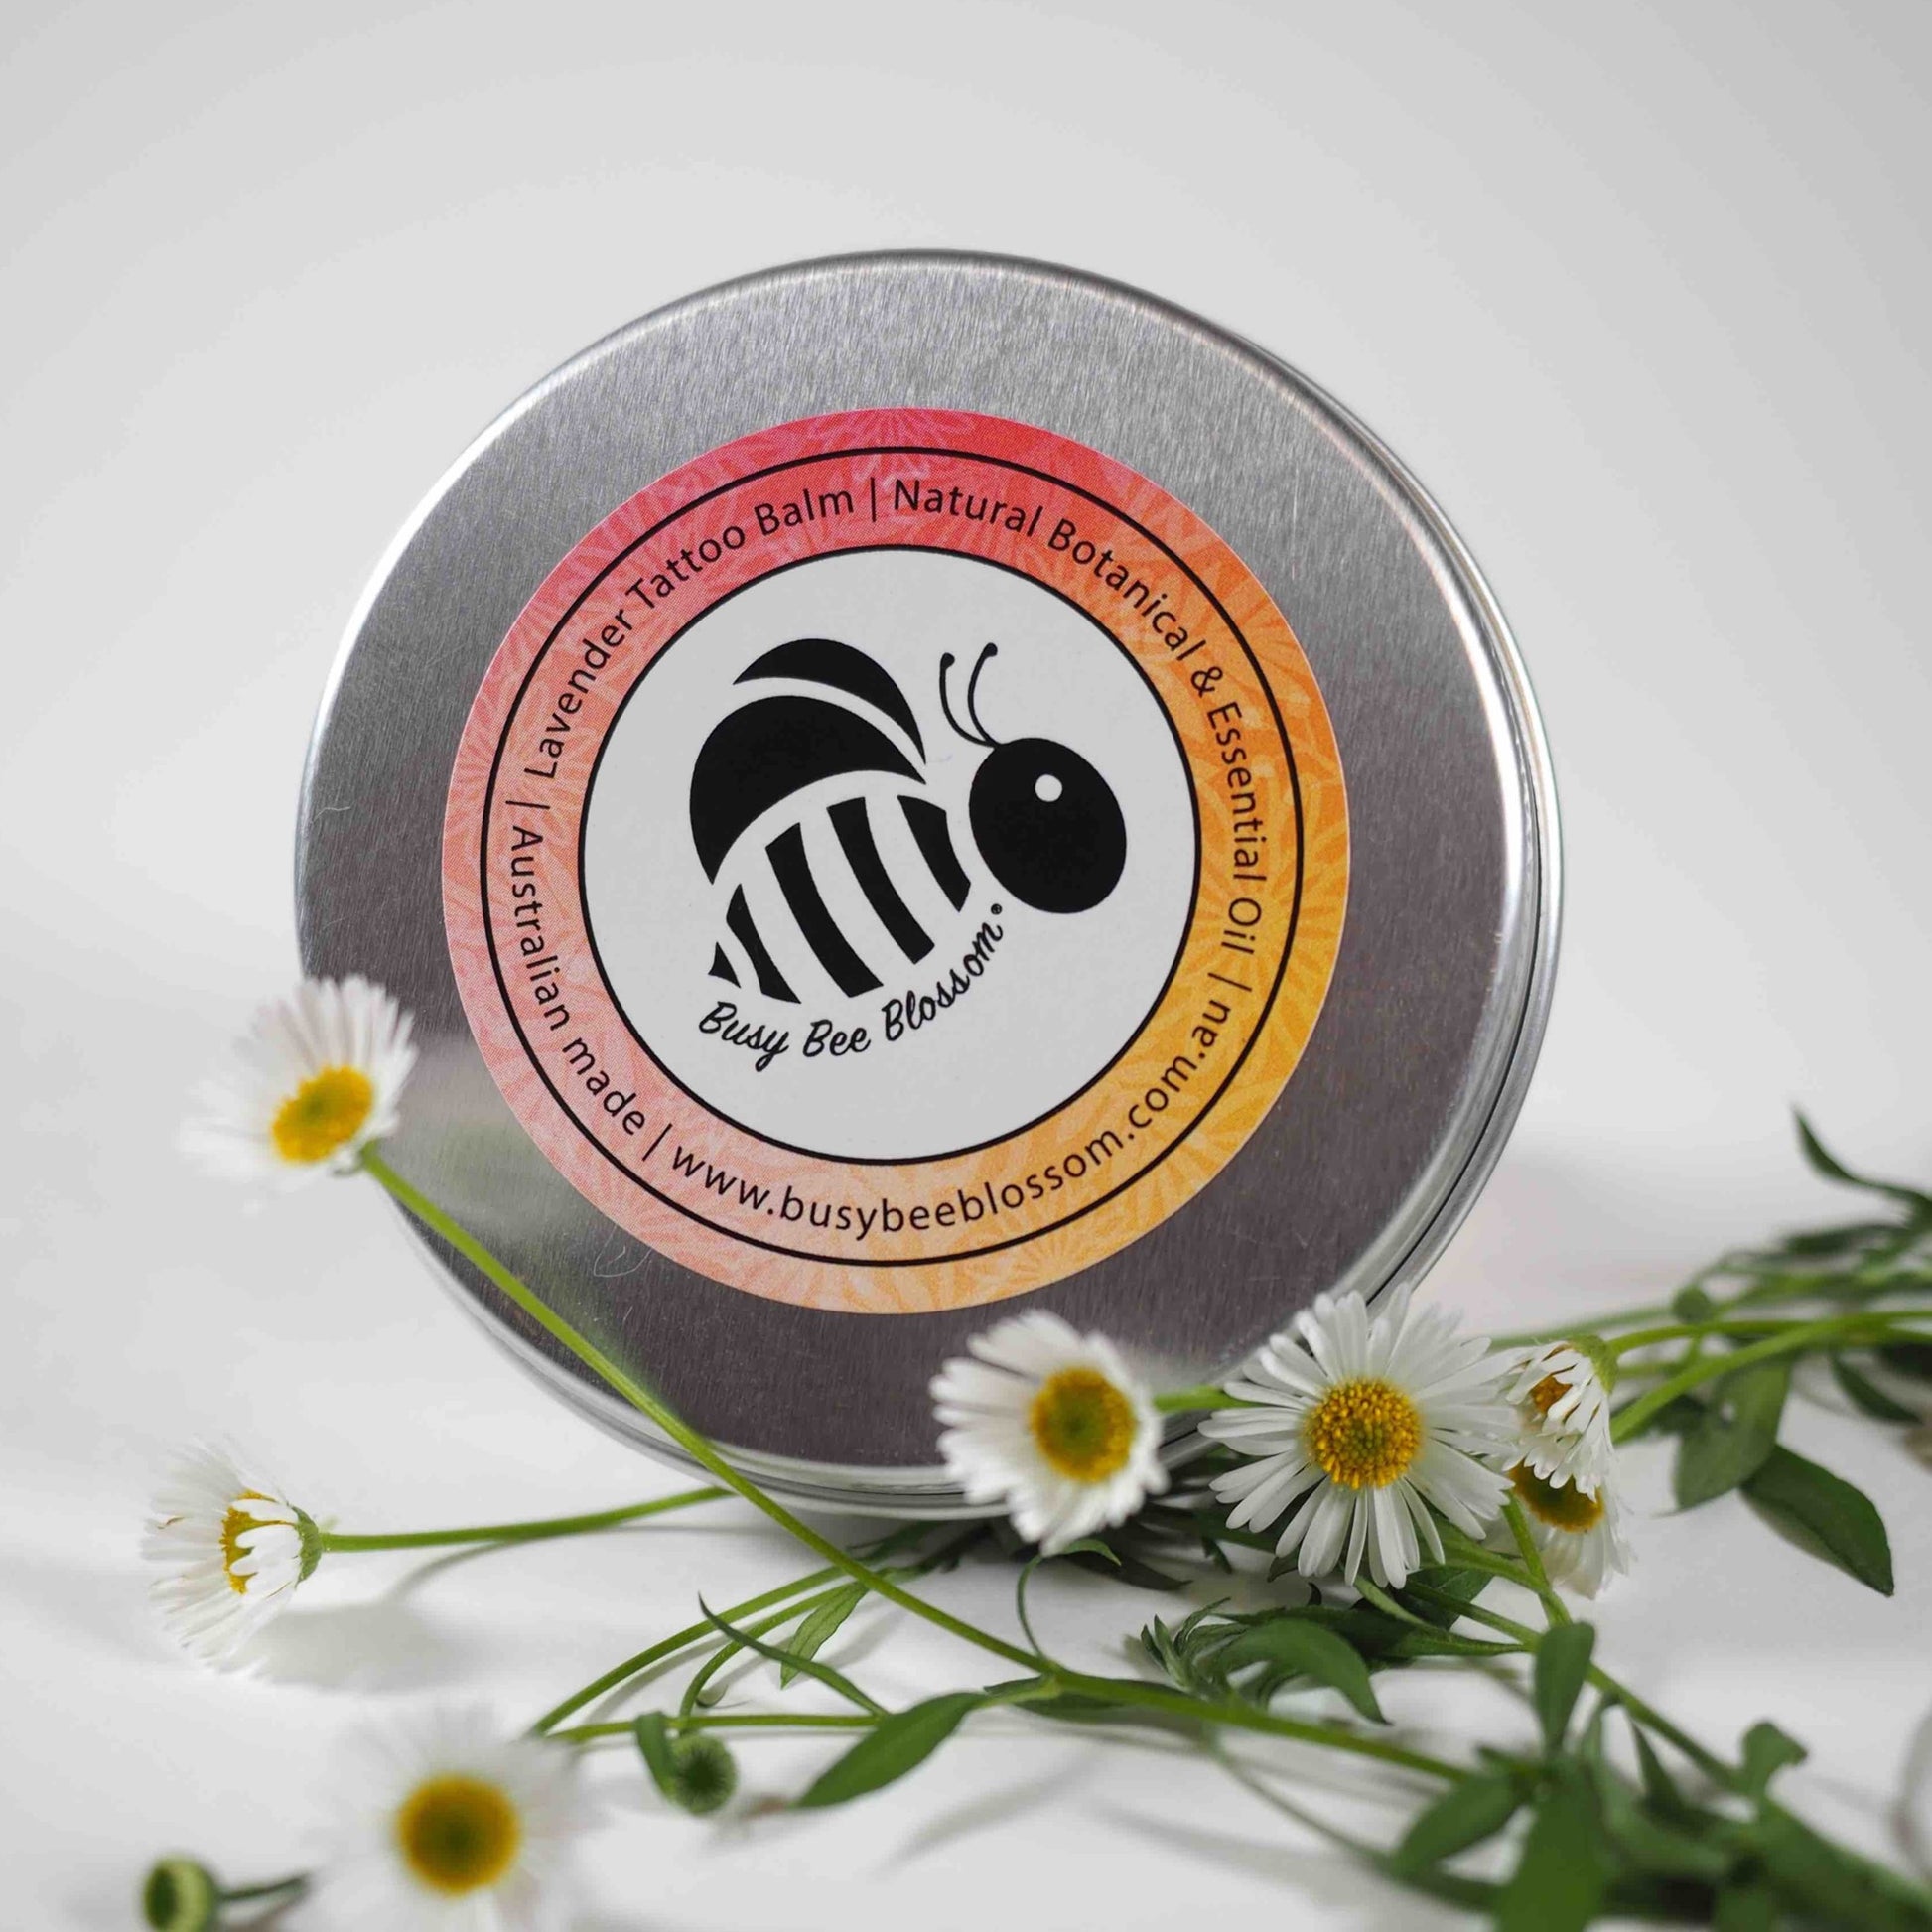 Busy Bee Blossom front view of Organic Lavender Tattoo Balm